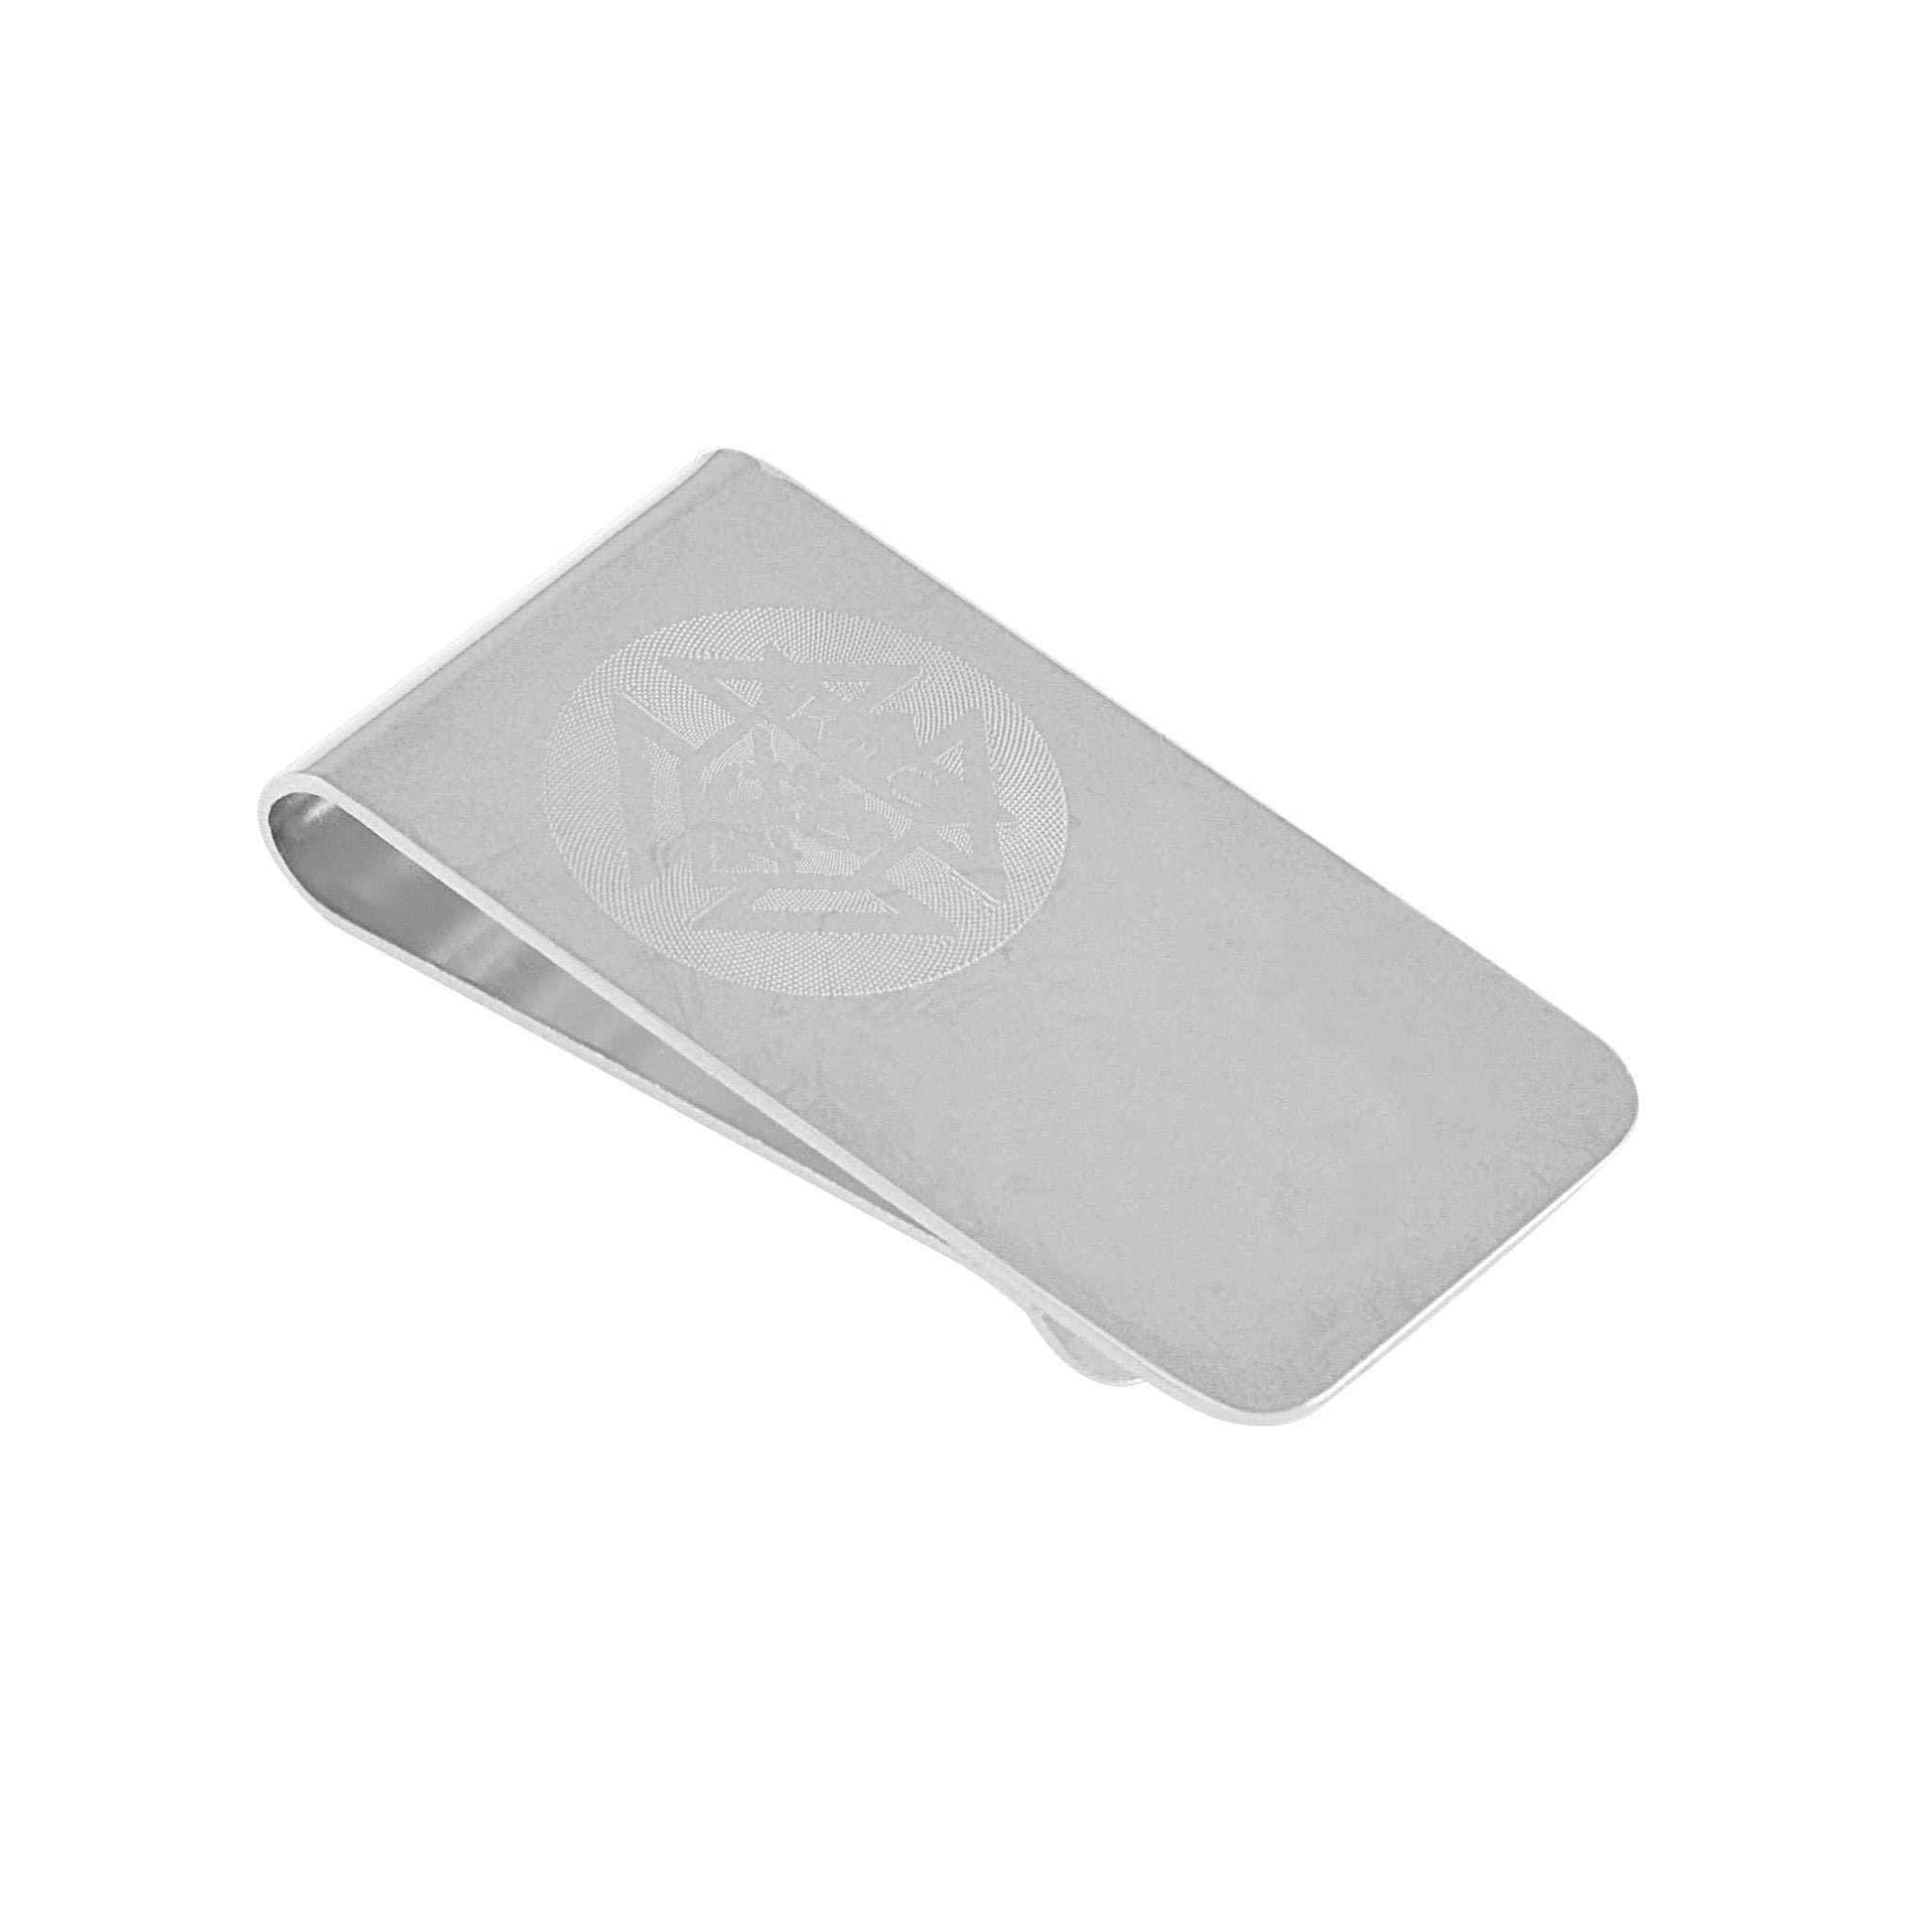 A emblem money clip displayed on a neutral white background.